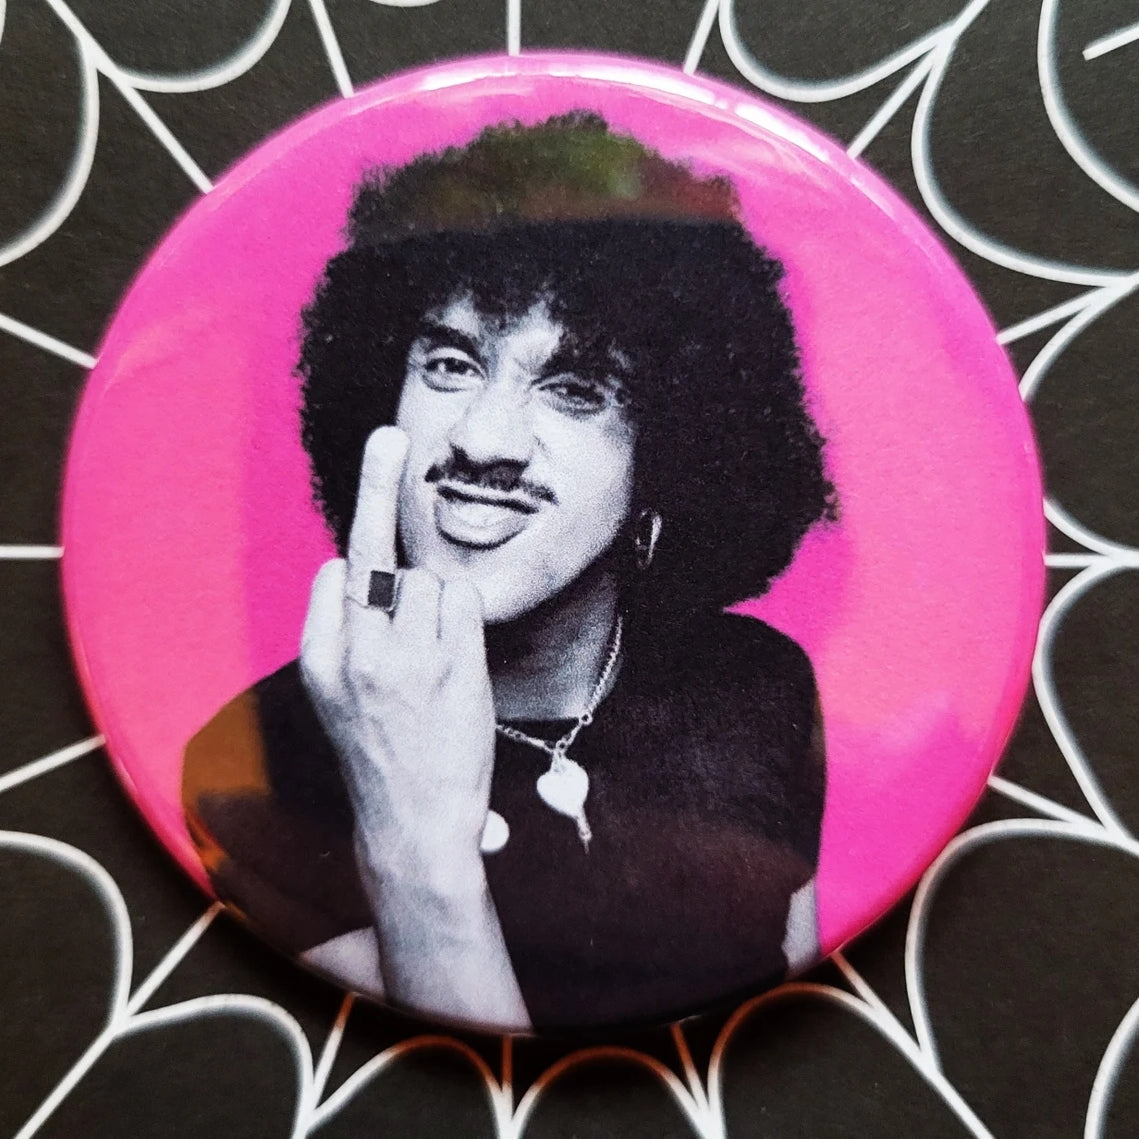 2.25” button of Phil Lynott from Thin Lizzy flipping the bird in front of a neon pink background 